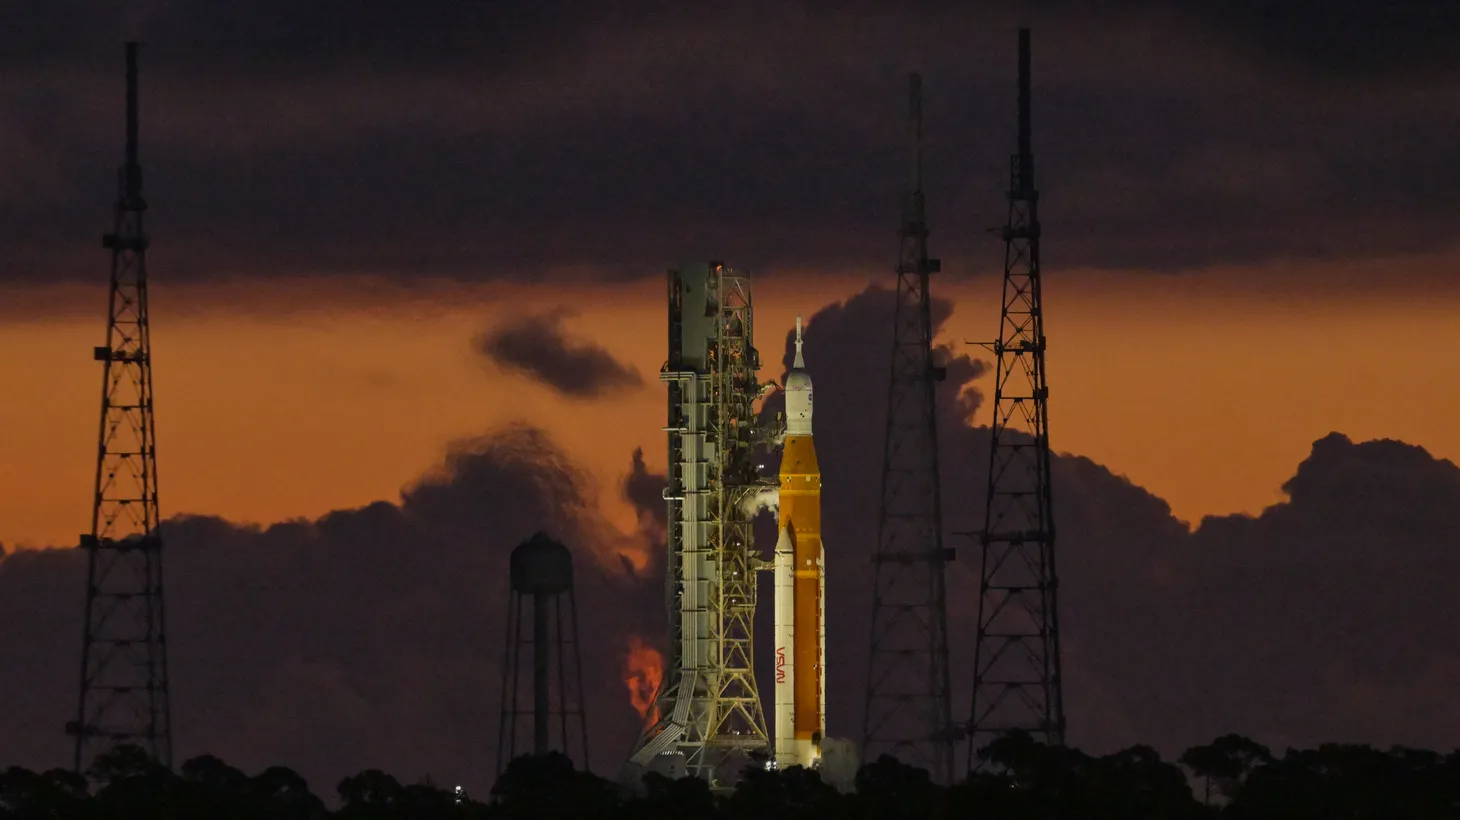 NASA's next-generation moon rocket, the Space Launch System (SLS), sits on the pad early in the morning before the unmanned Artemis 1 mission was scrubbed, at Cape Canaveral, Florida, U.S., August 29, 2022.